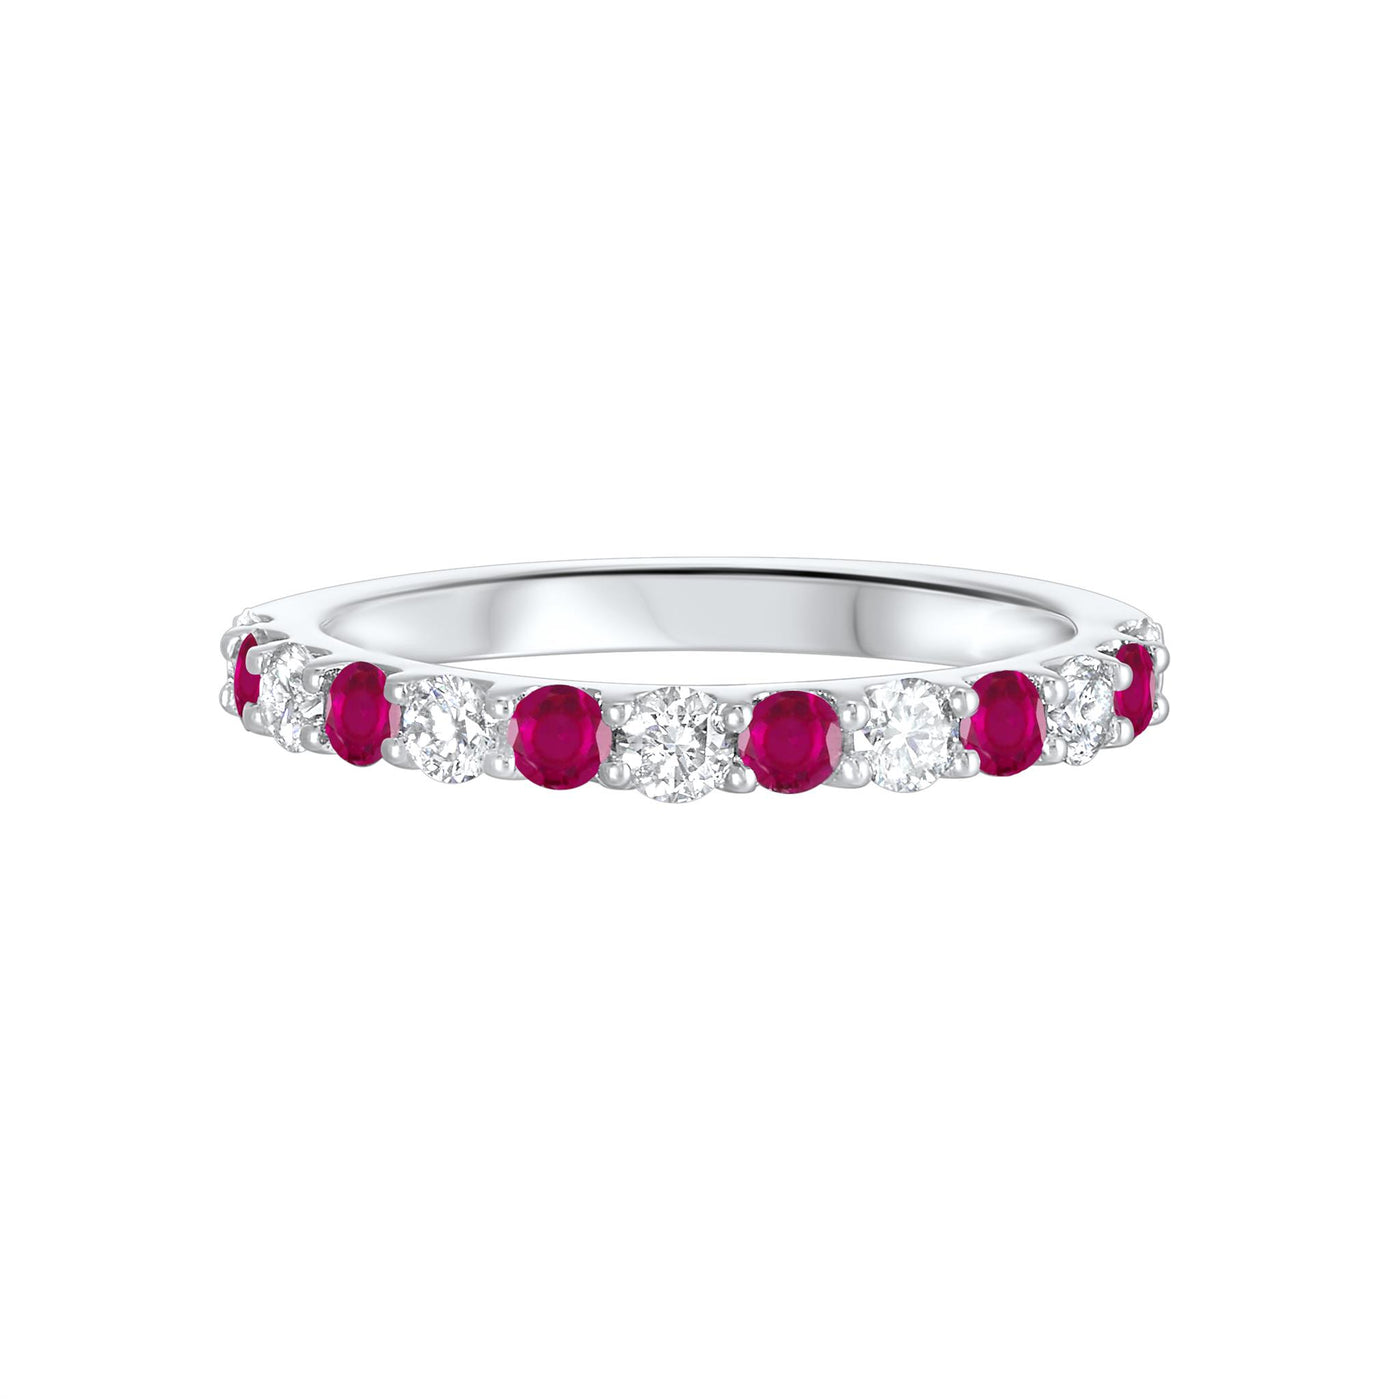 14K White Gold .99ctw Alternating Gemstone Style Ring with Diamonds and Rubies